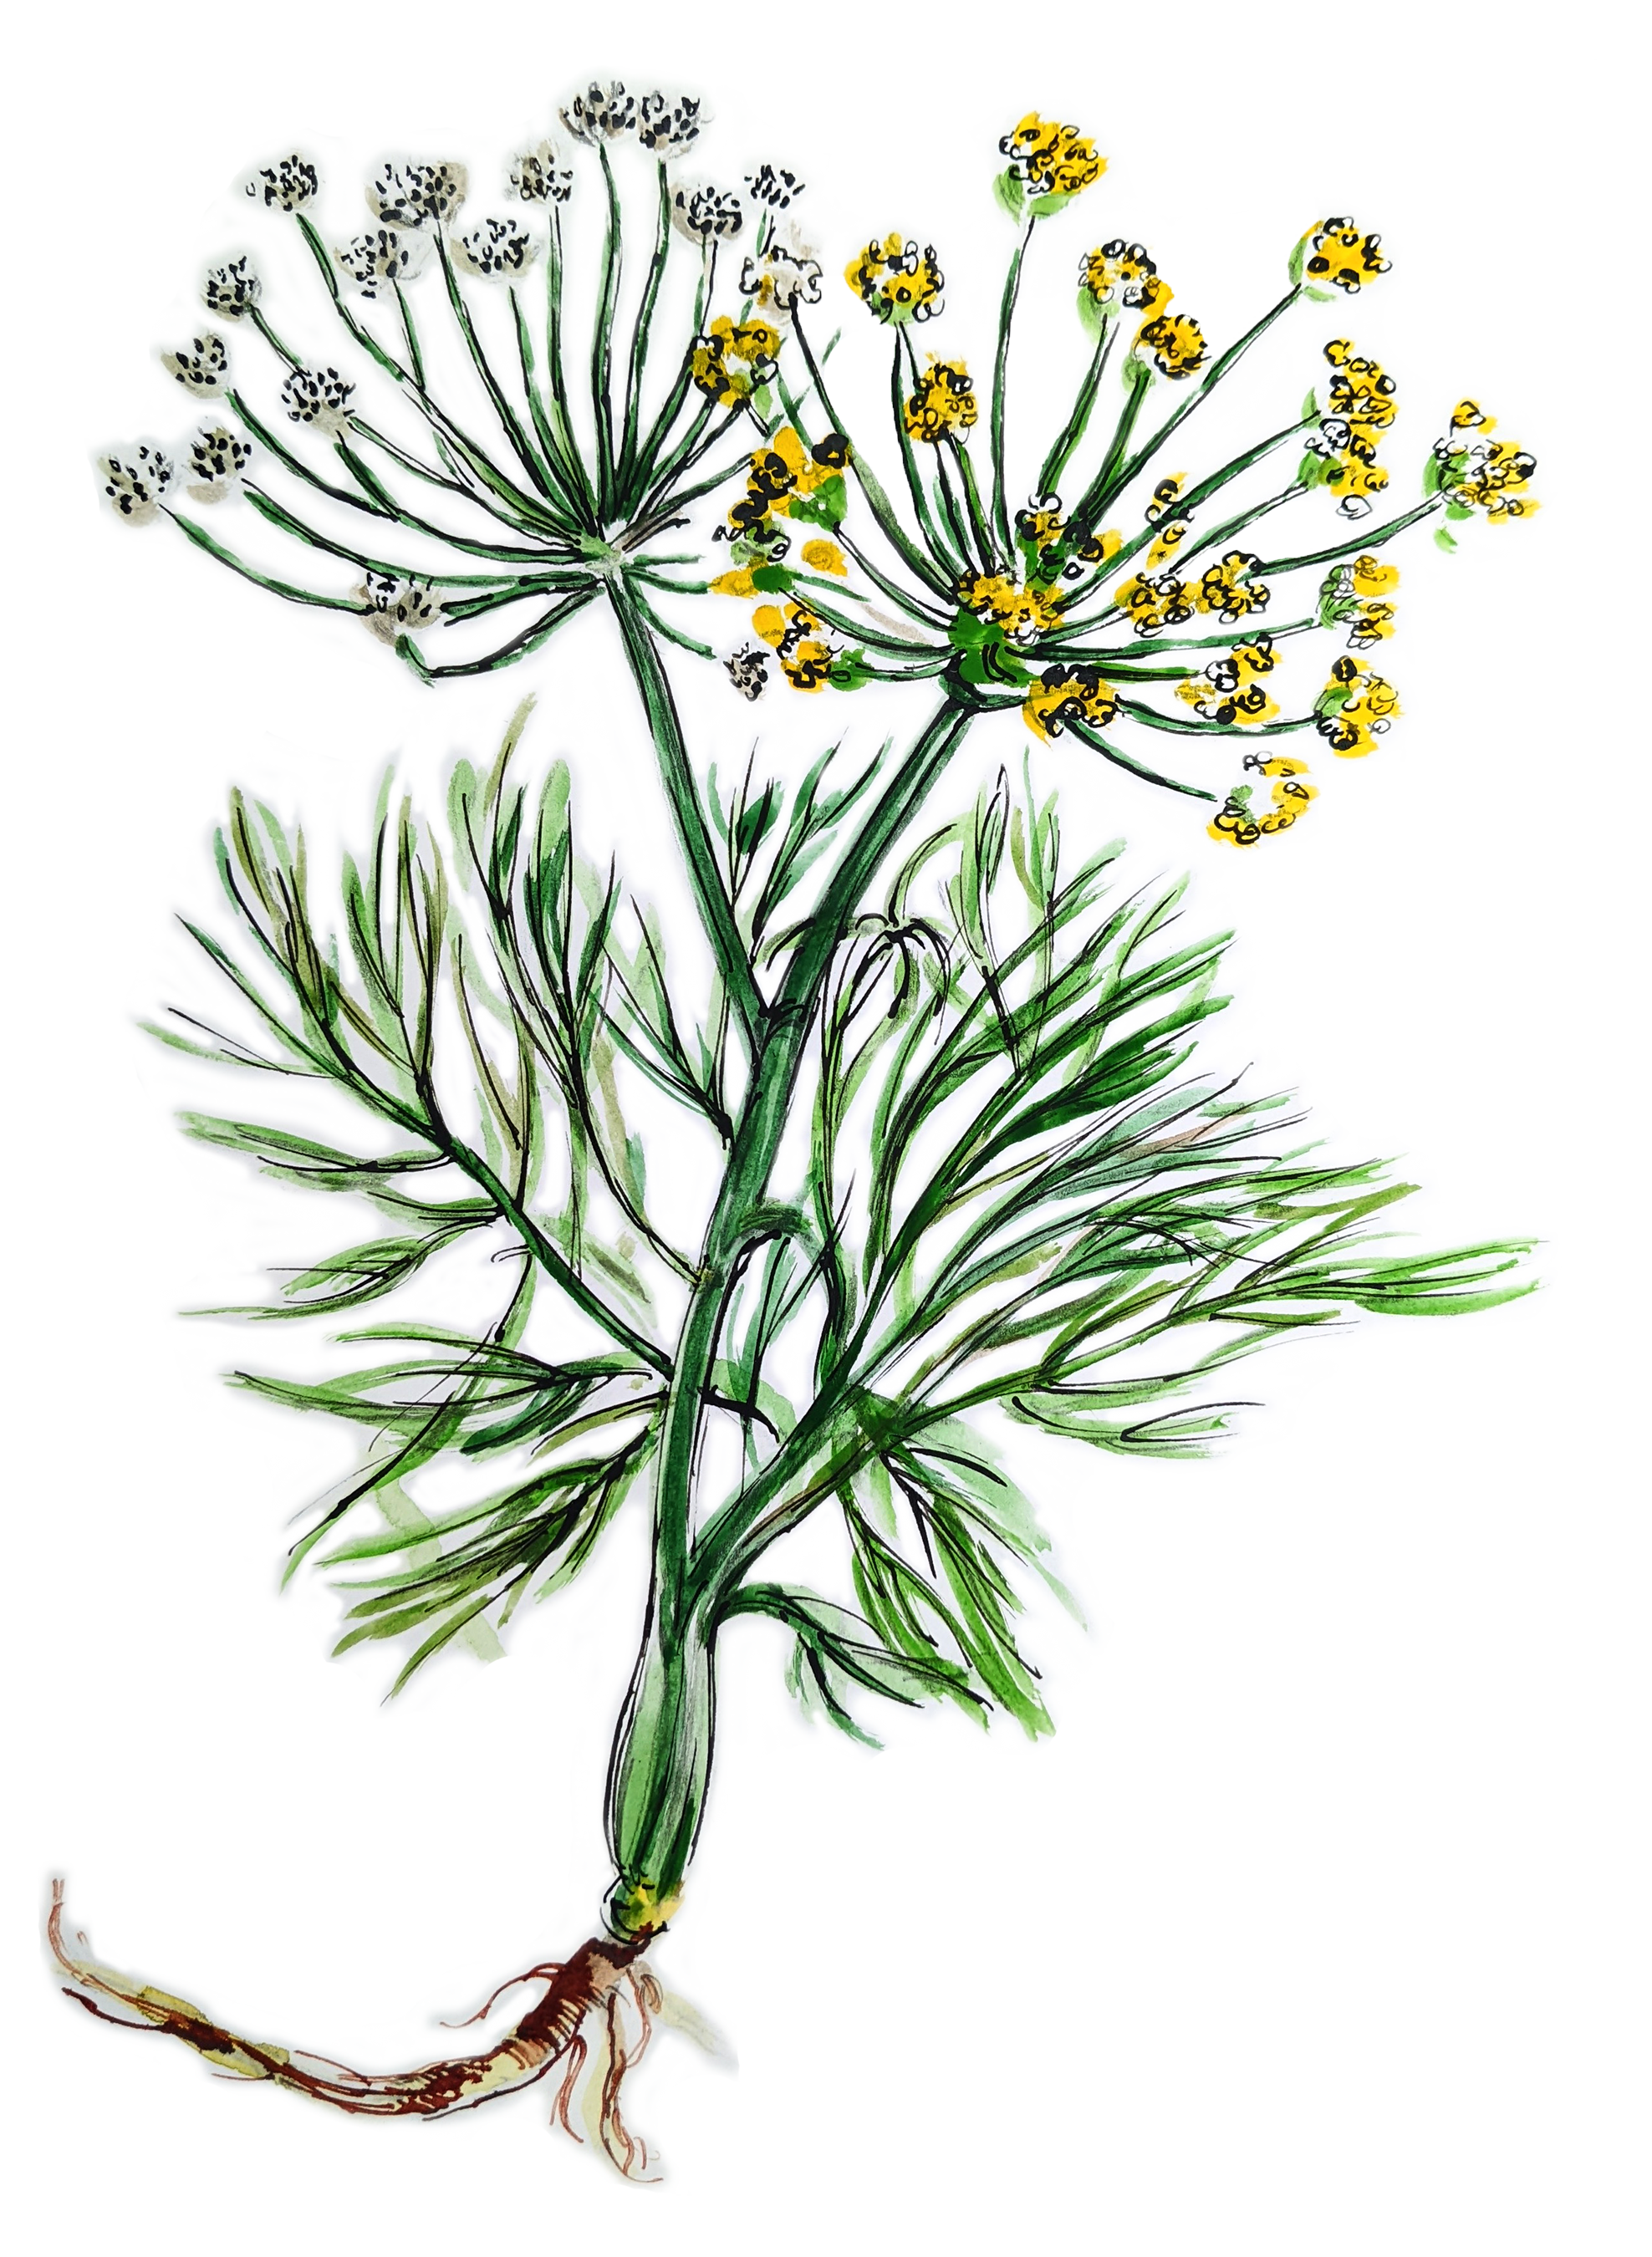 watercolor illustration of dill 